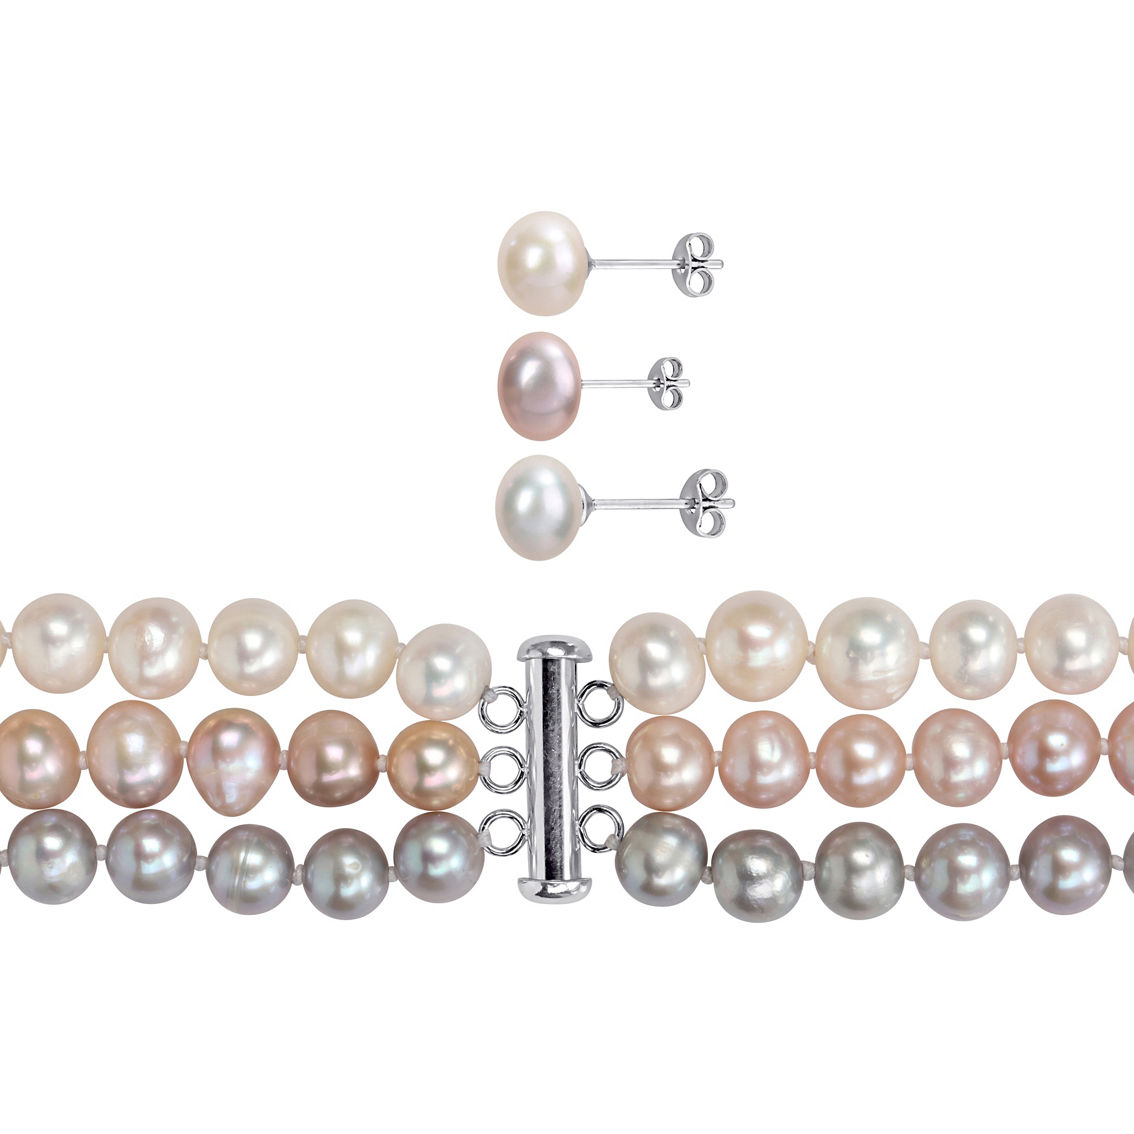 Sofia B. Cultured Freshwater Pearl Necklace, Bracelet and Earrings 9 pc. Set - Image 2 of 5